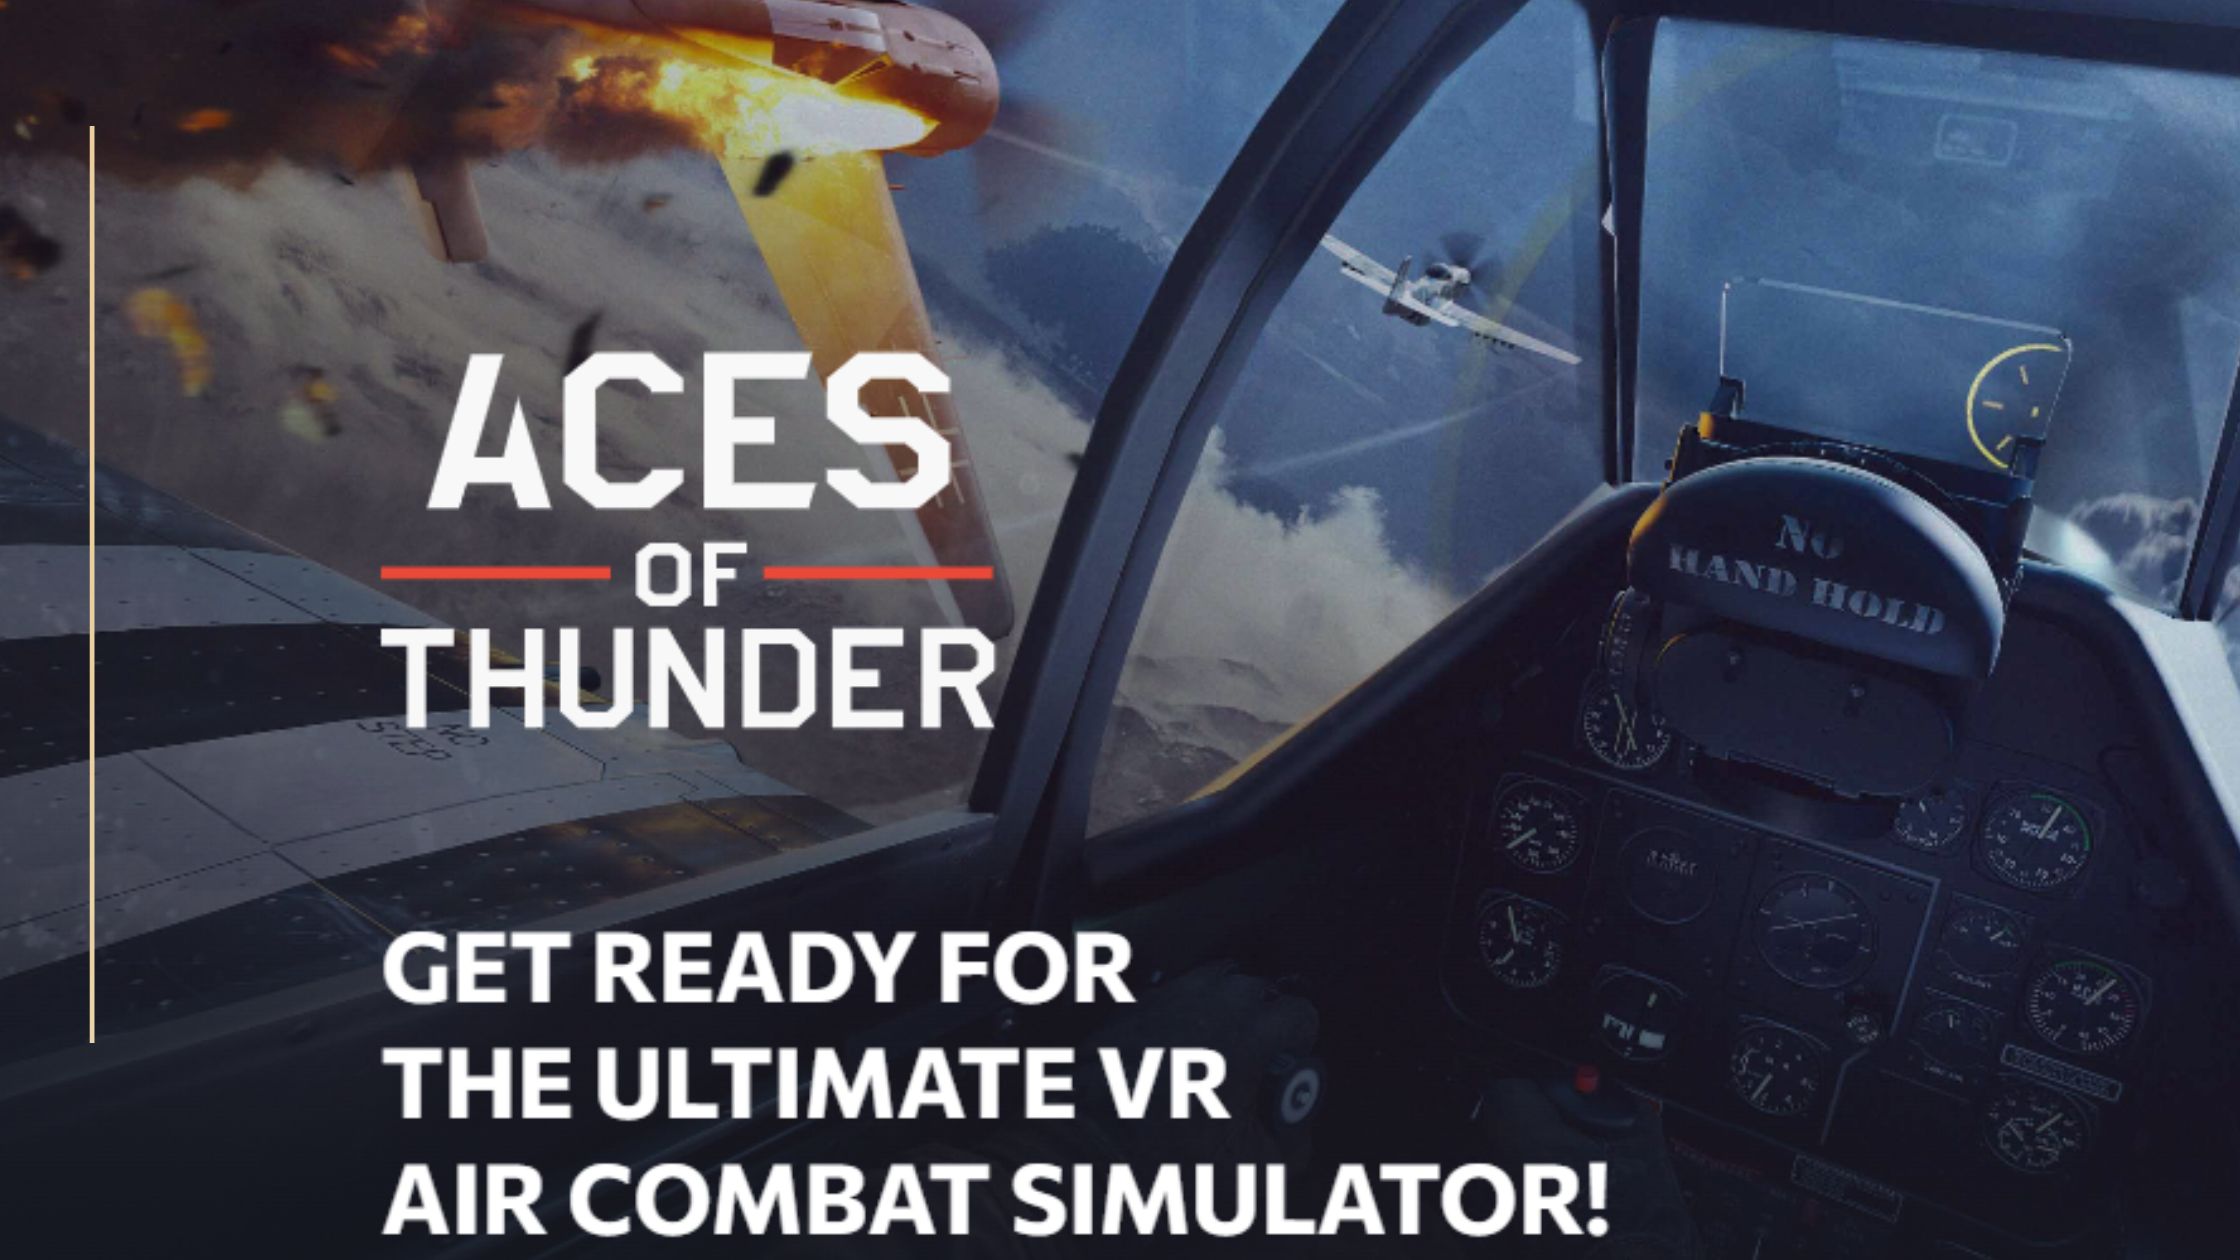 Aces of thunder was developed from Gaijin entertainment